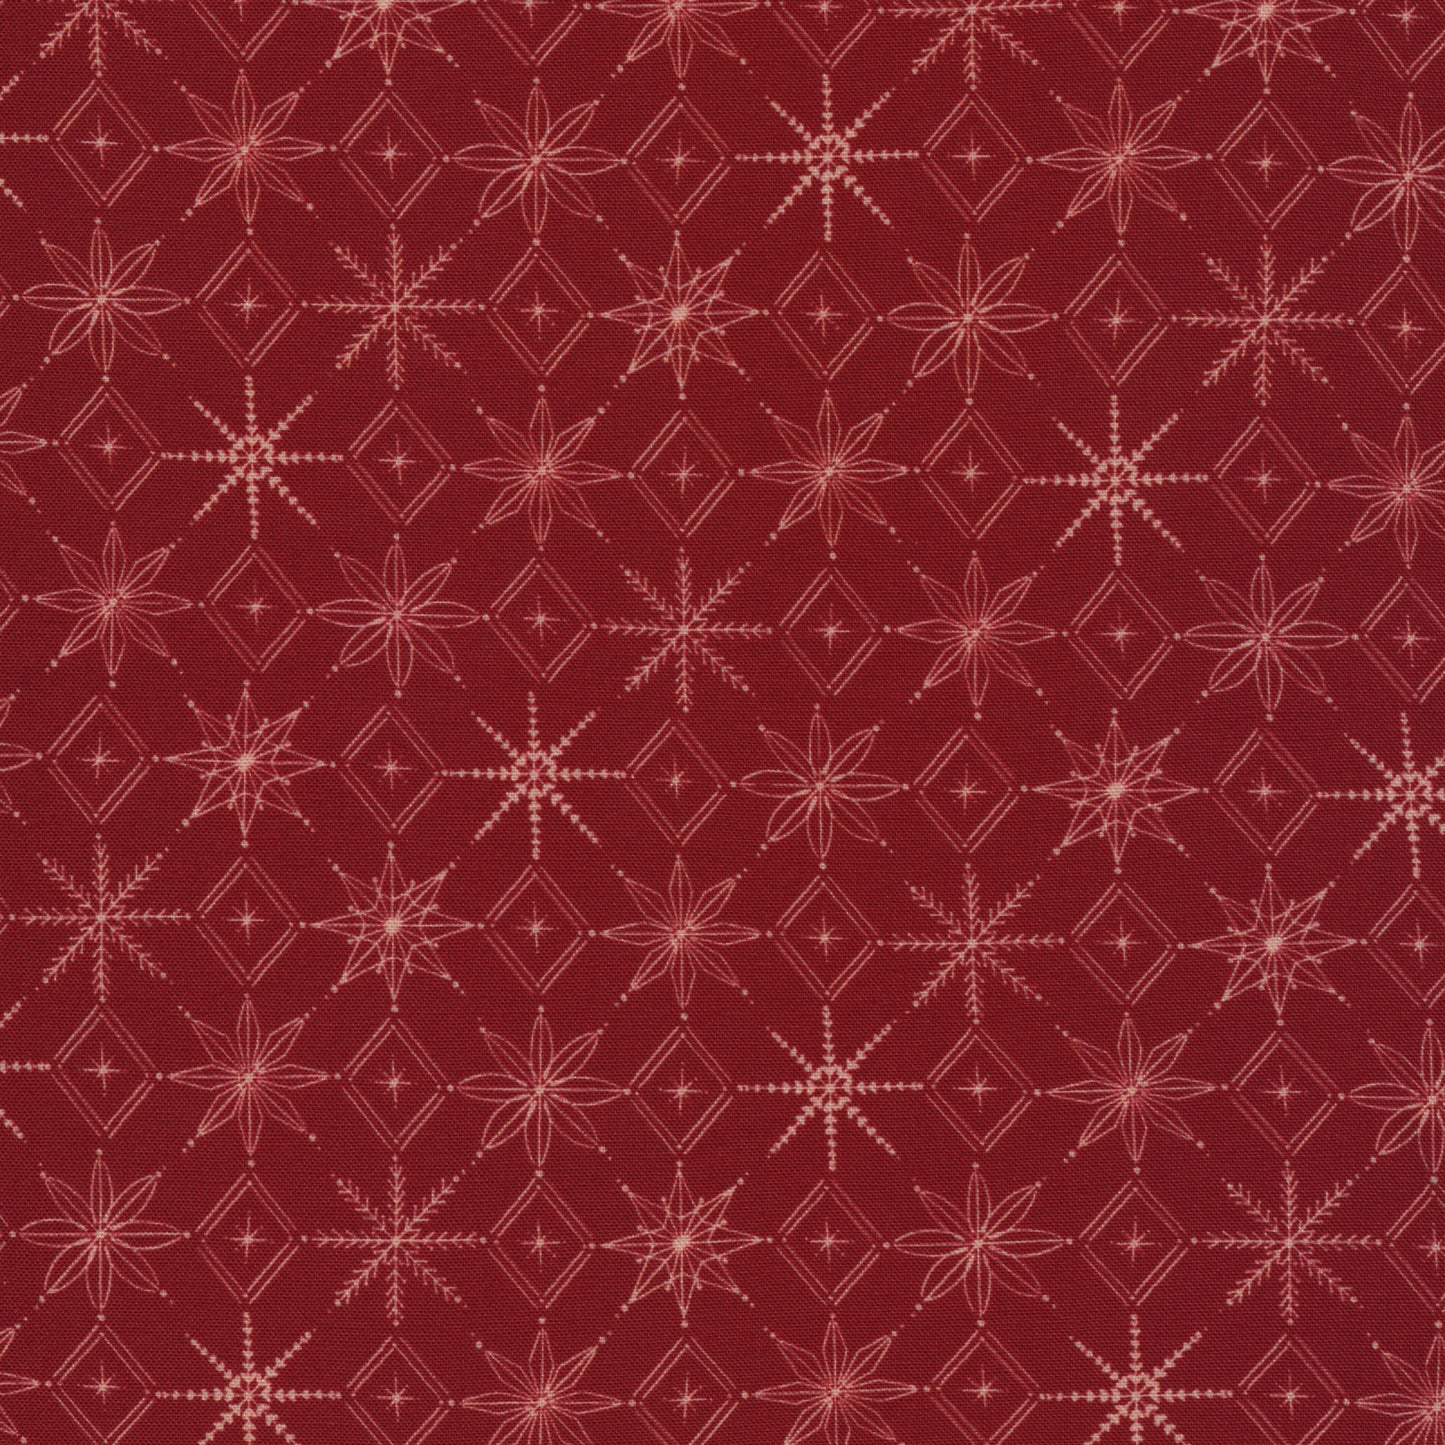 Warm & Cozy (Cloud9) - Snowflakes Red